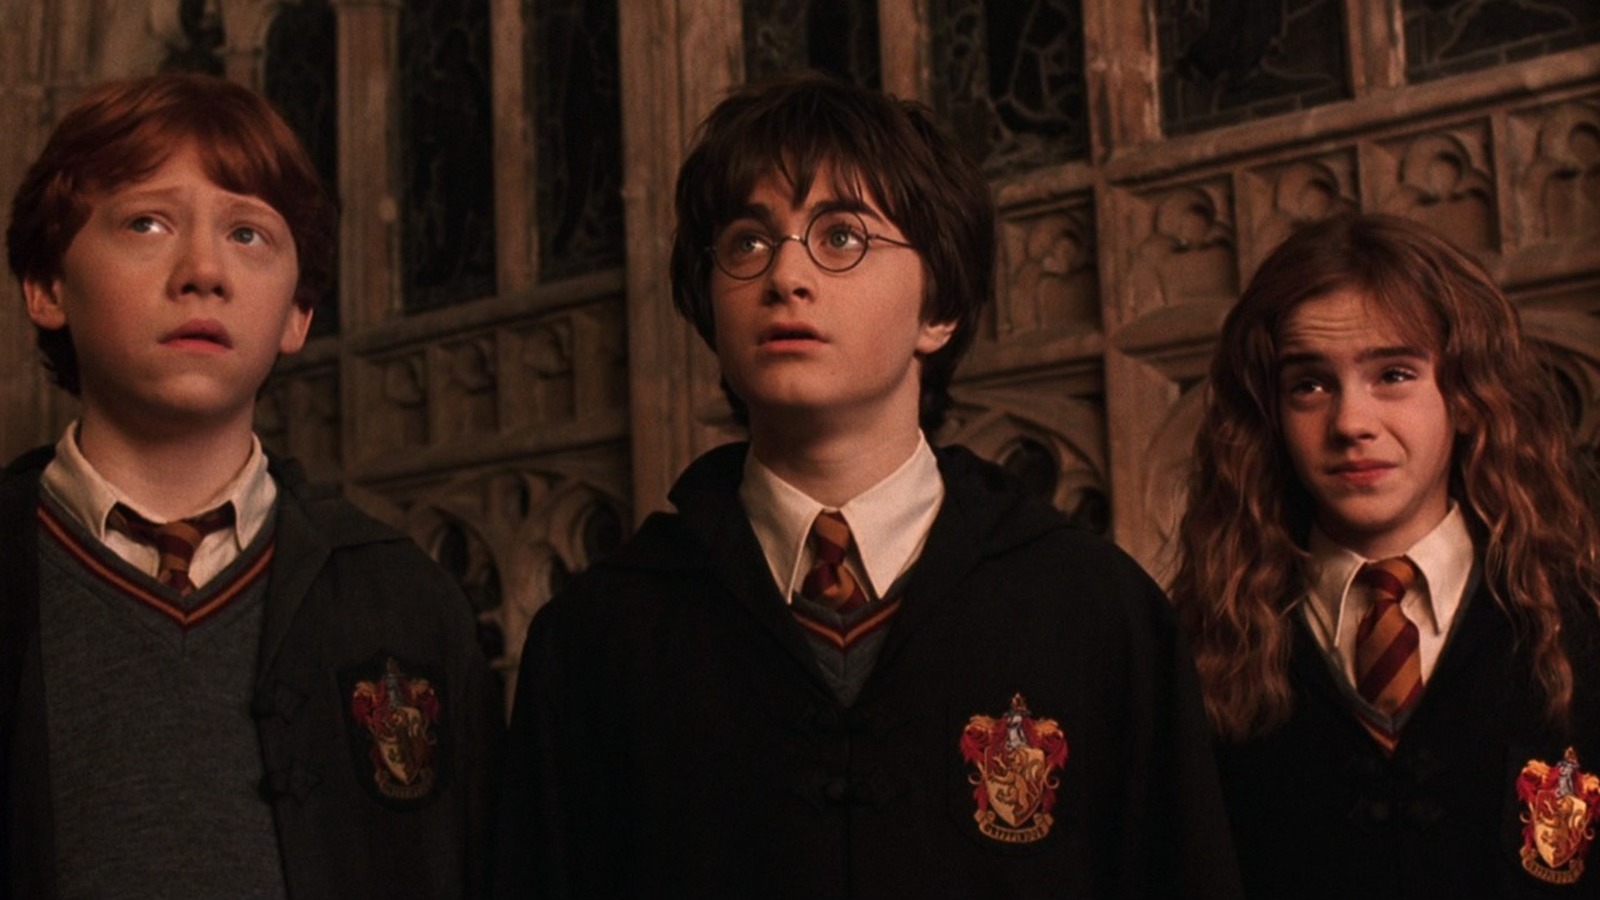 Here's how you can watch all of the Harry Potter movies